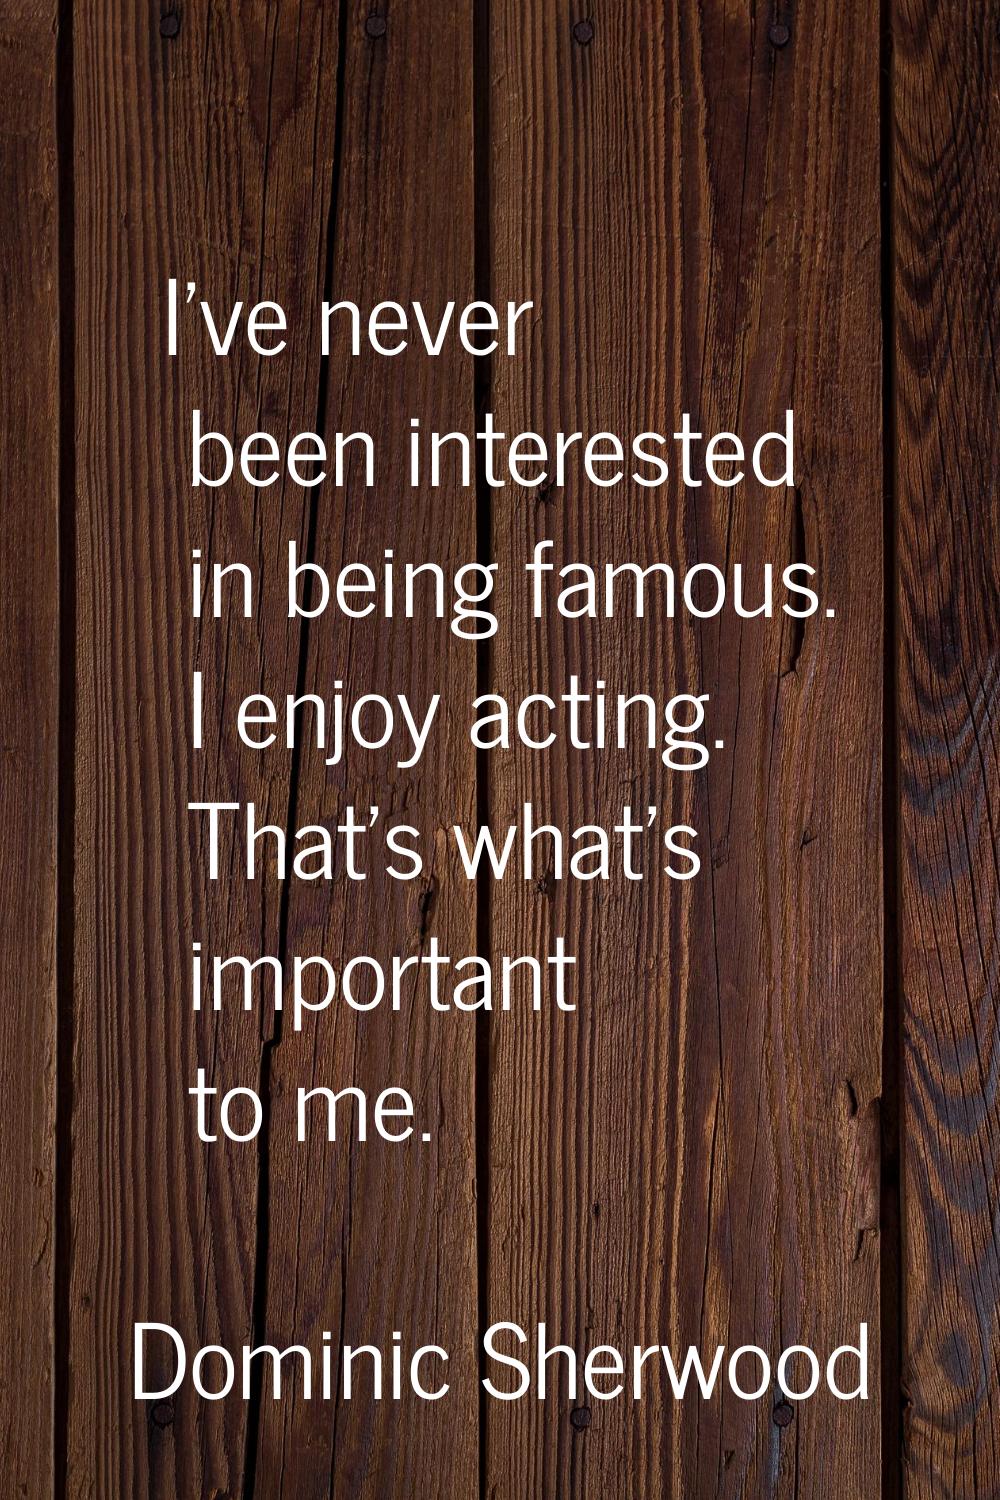 I've never been interested in being famous. I enjoy acting. That's what's important to me.